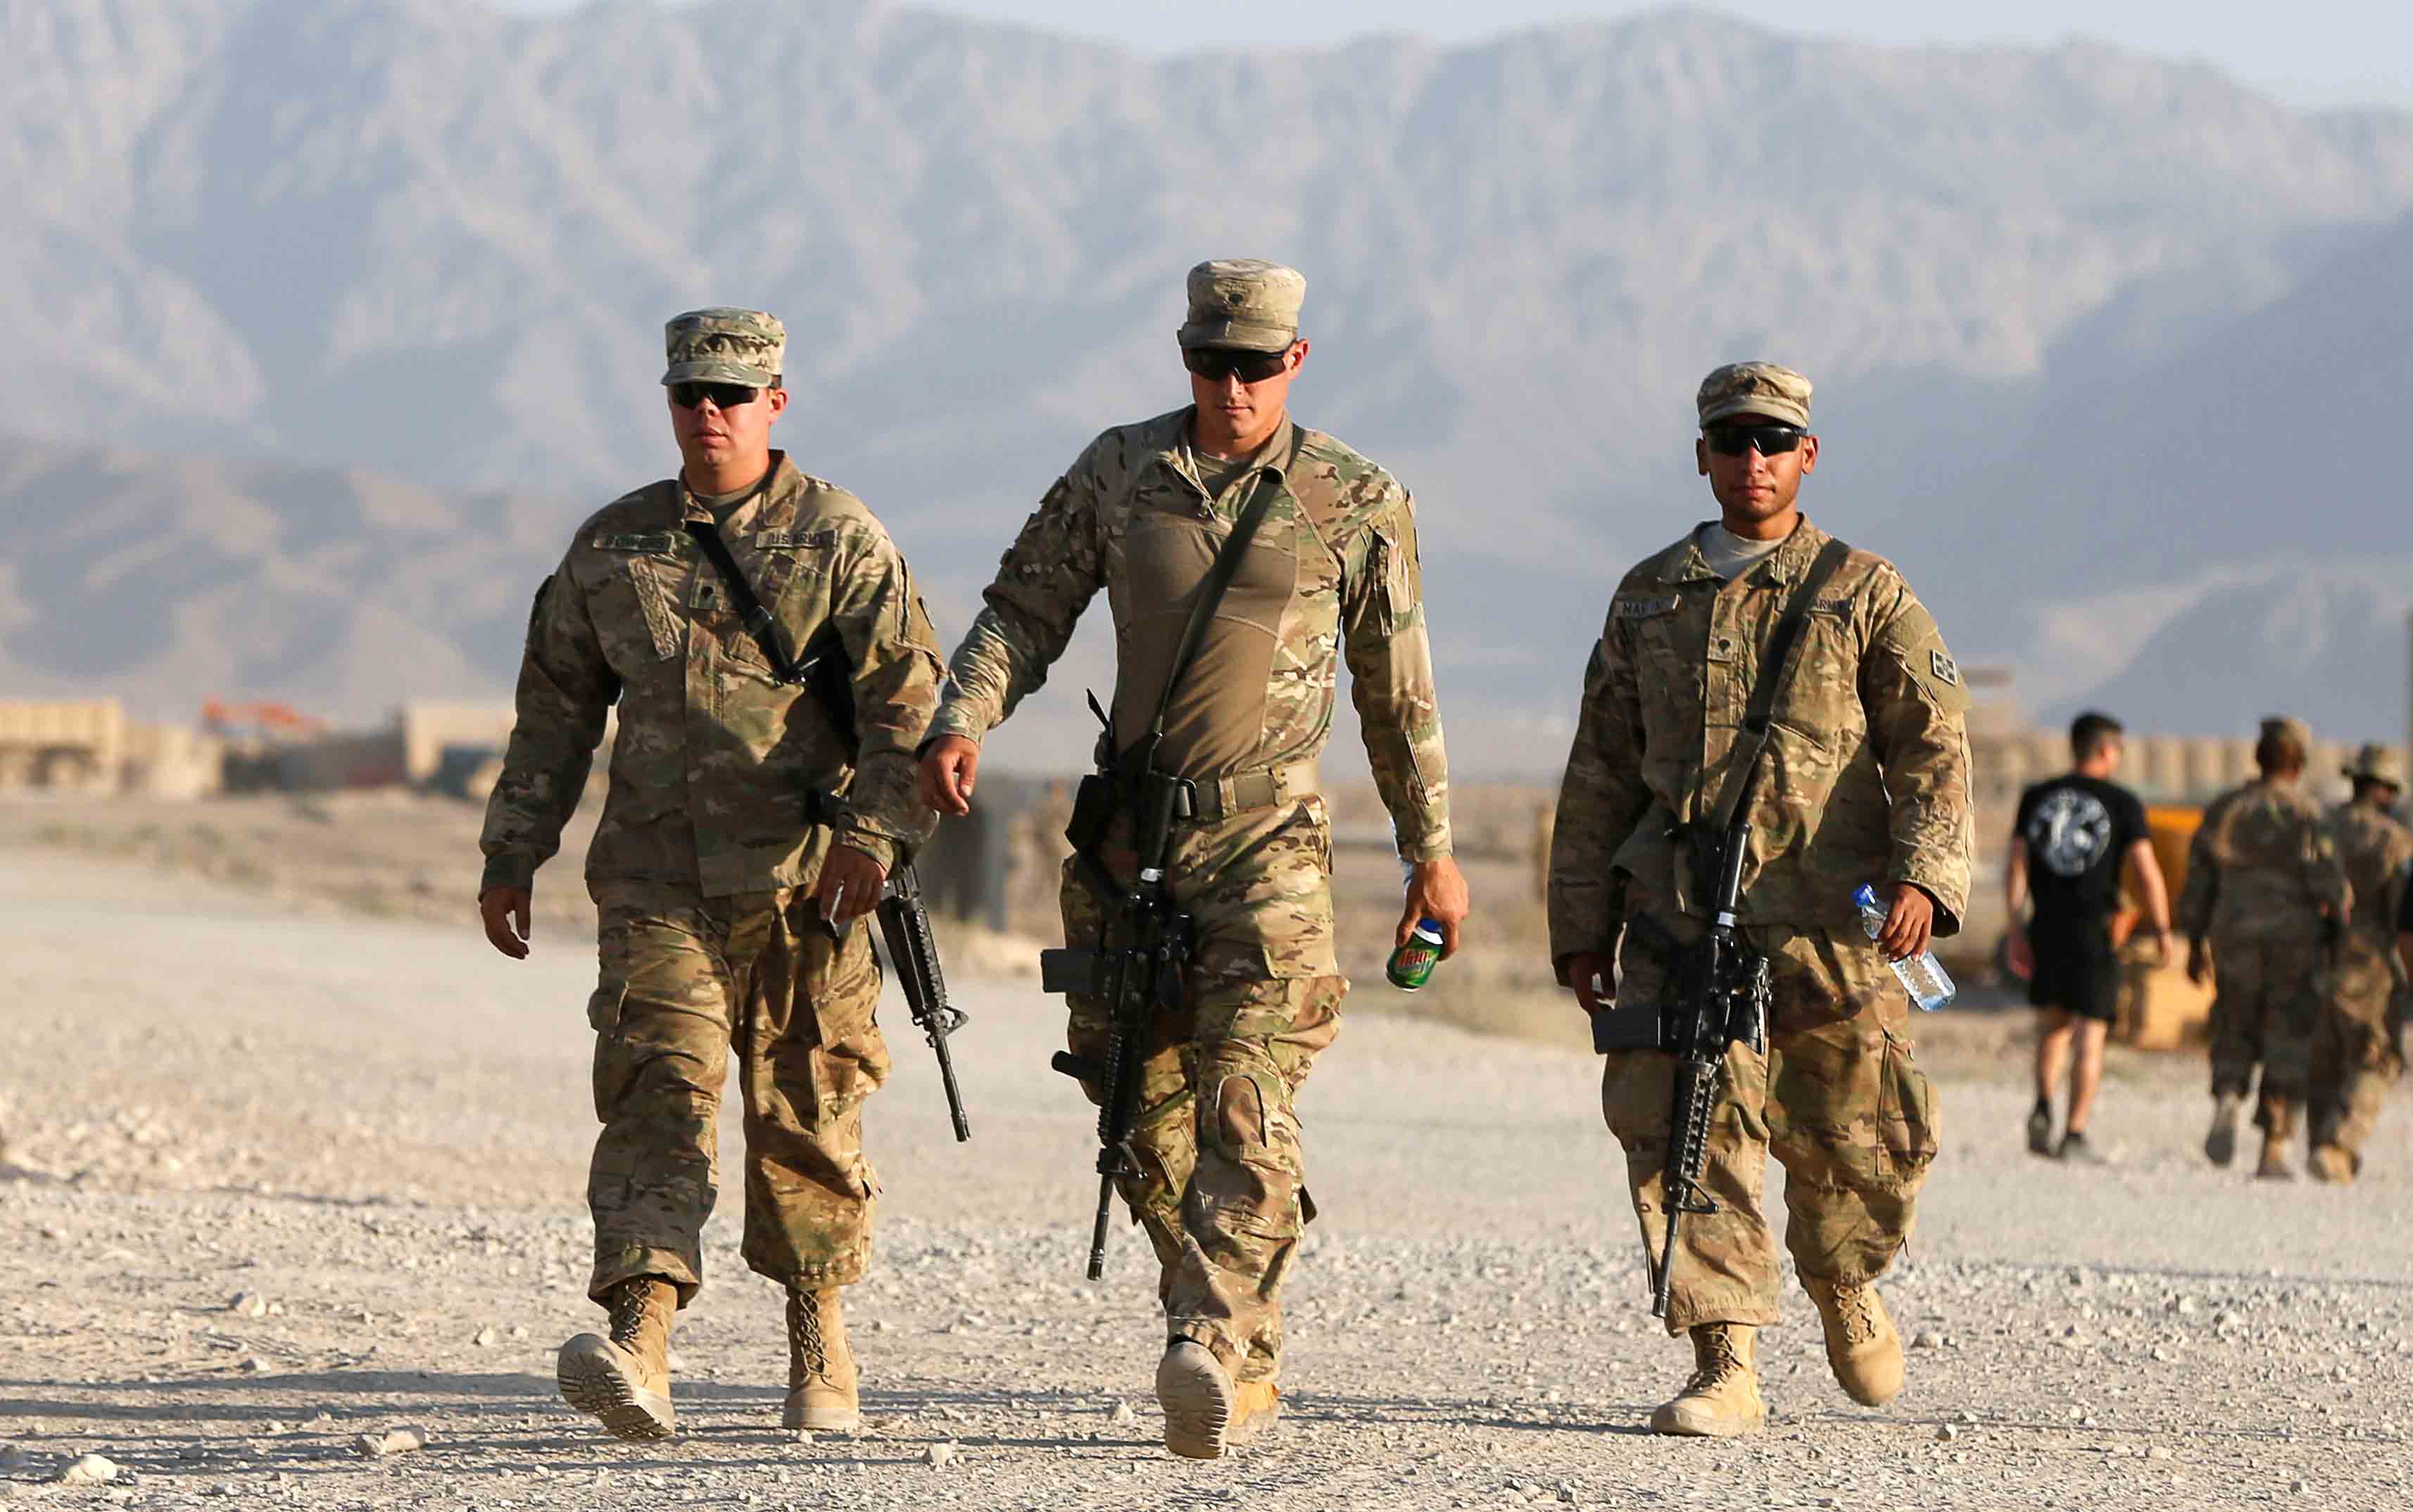 Is the withdrawal of US troops from Afghanistan imminent? | Arab News